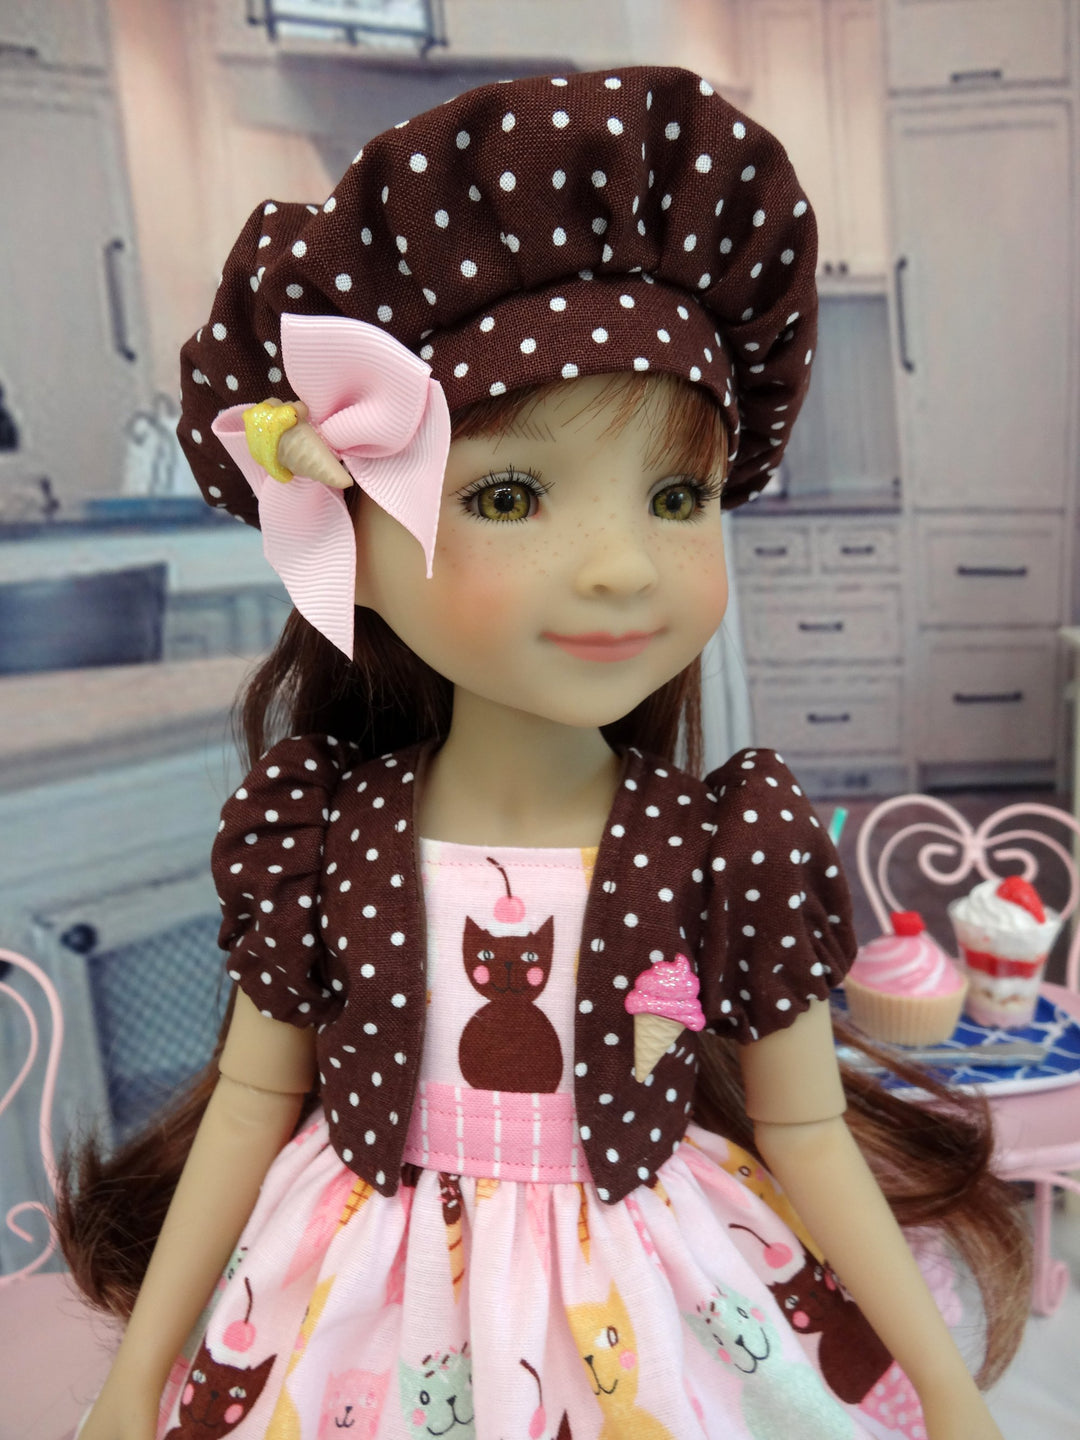 Purr-fect Scoop - dress & jacket for Ruby Red Fashion Friends doll